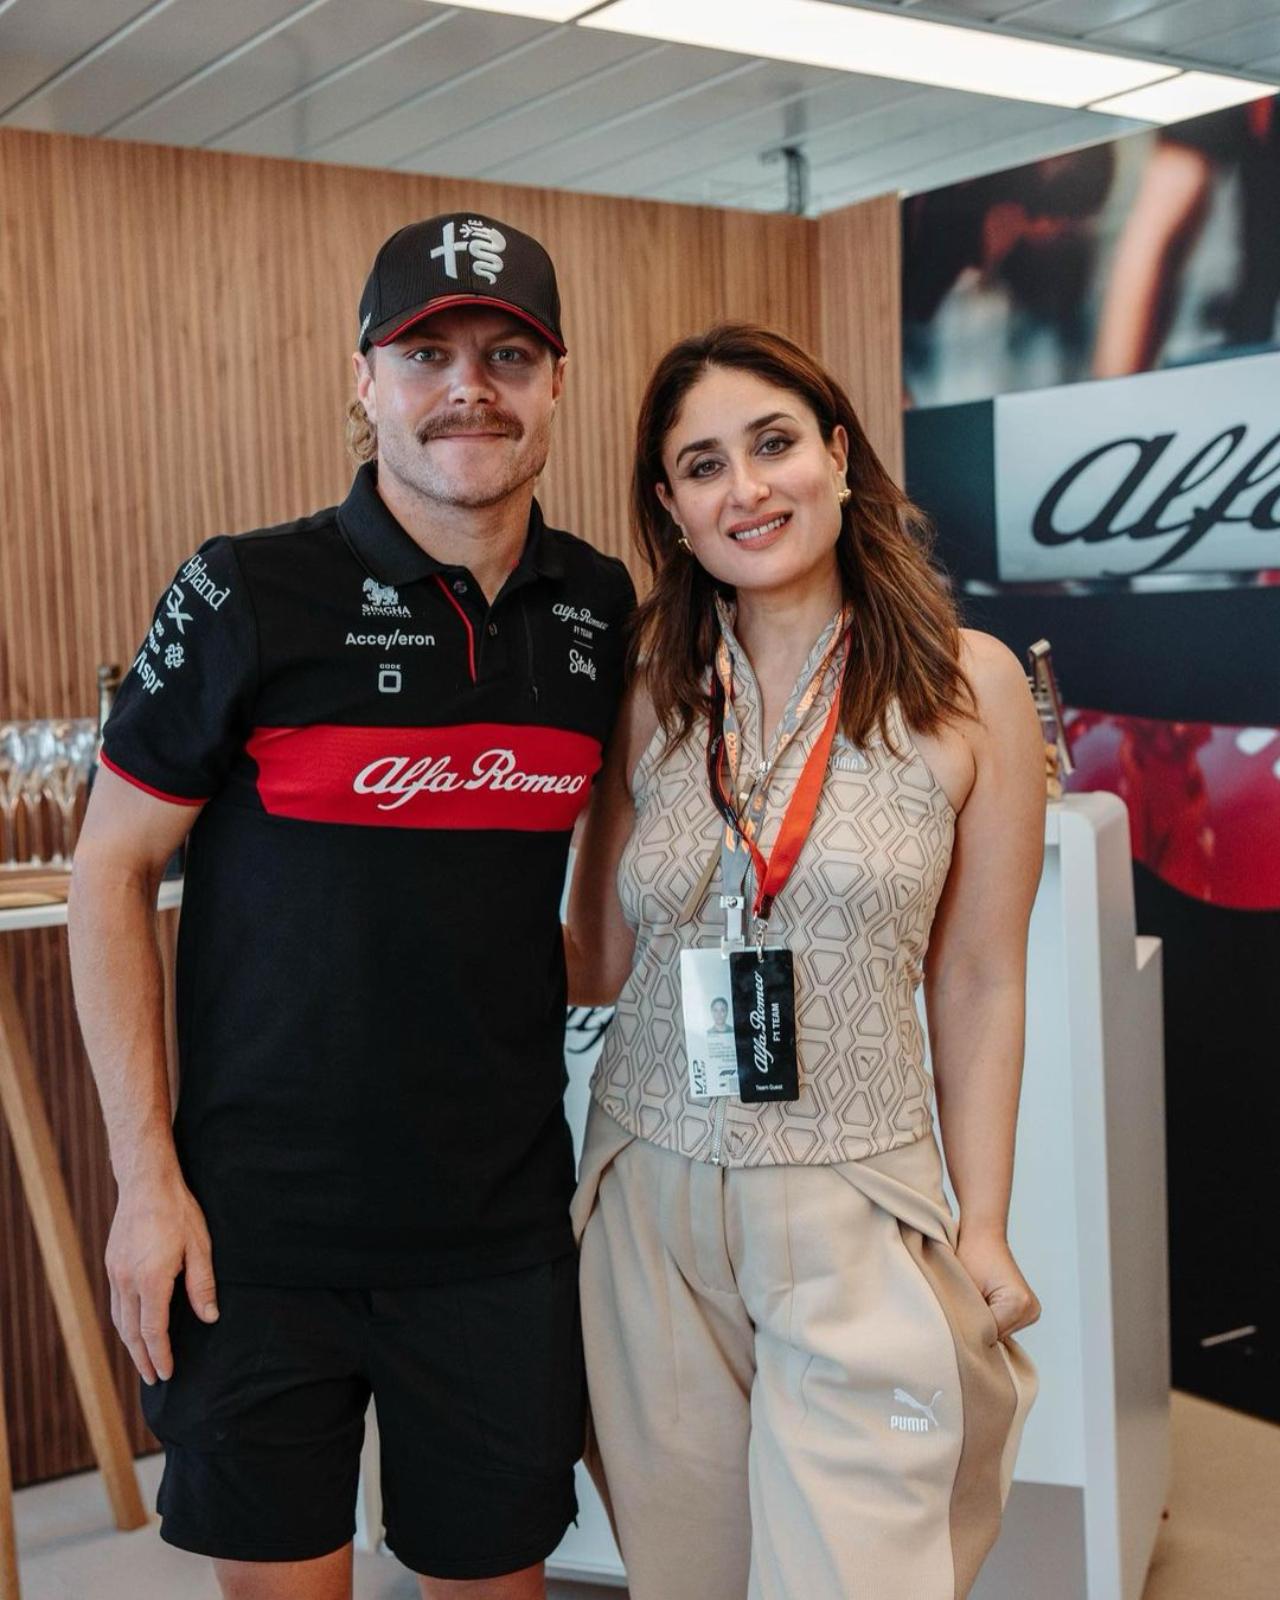 Being present on the practice day Kareena got the opportunity to witness the skills and techniques of the talented F1 drivers up-close. She is also expected to have interactive sessions with some of the drivers, including Fernando Alonso